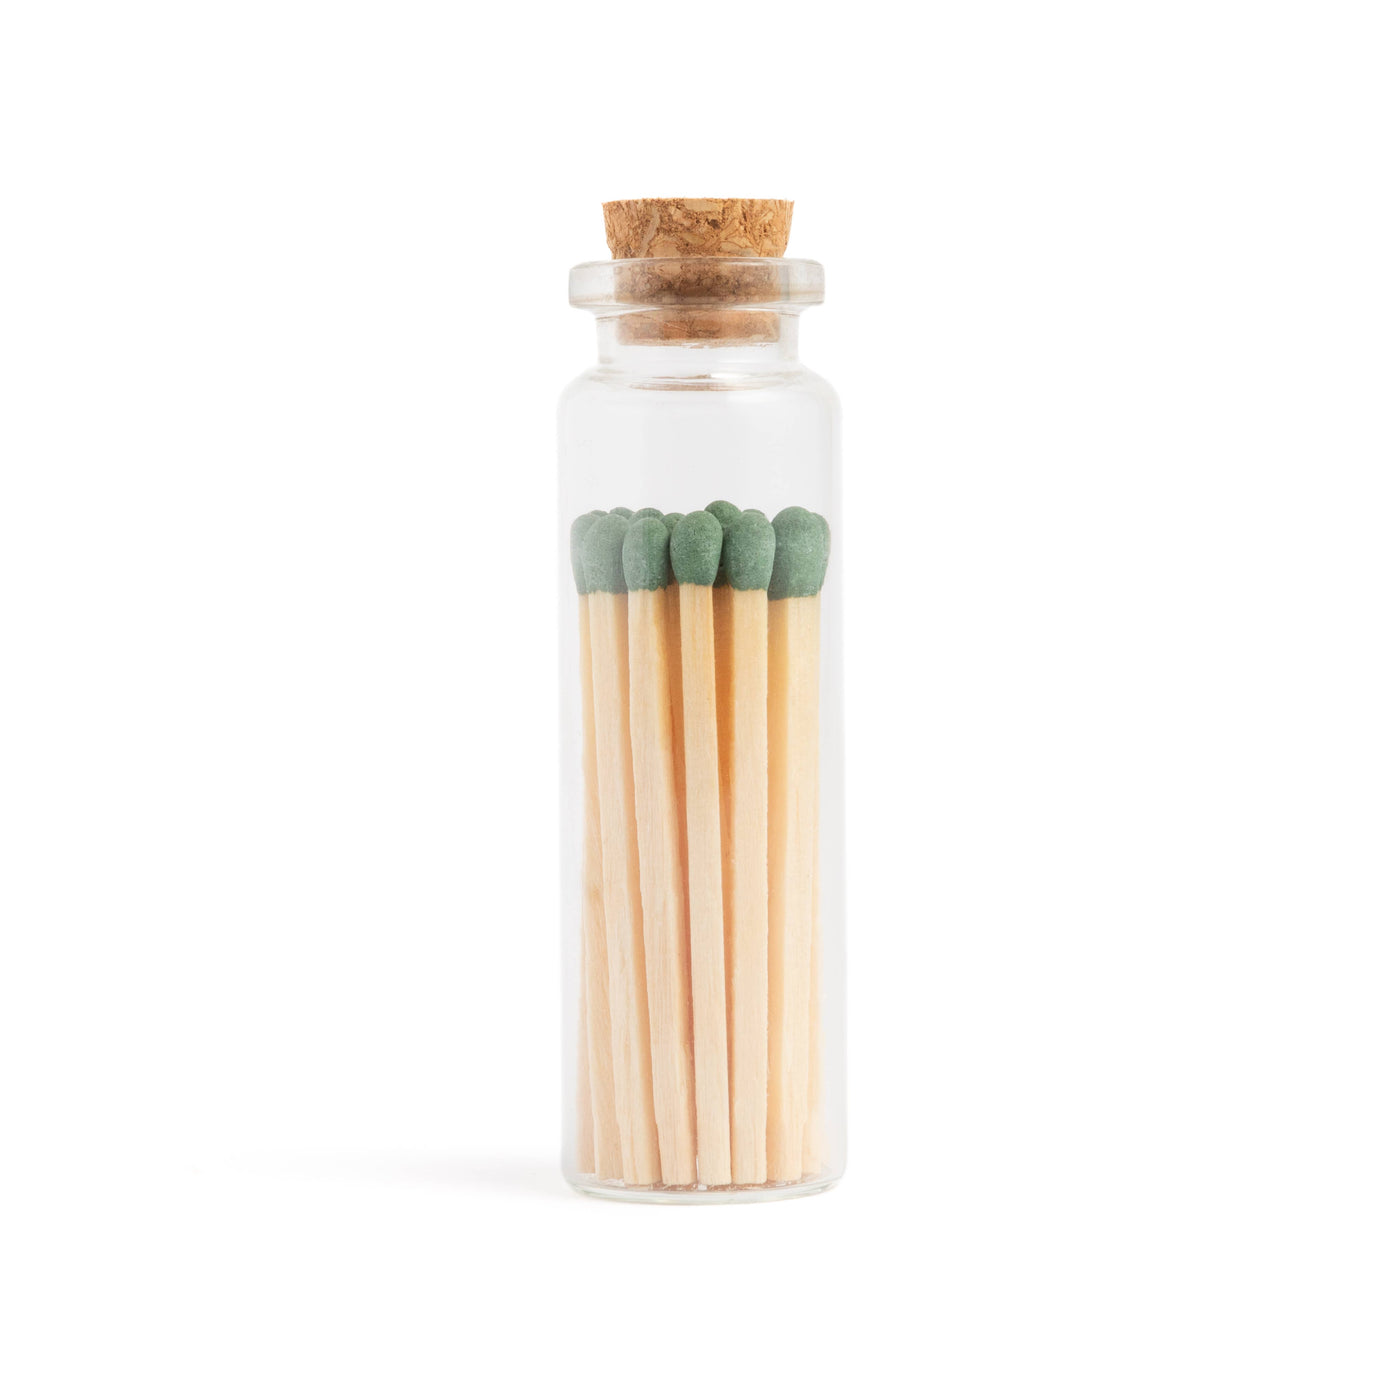 Juniper Green Matches in Small Corked Vial